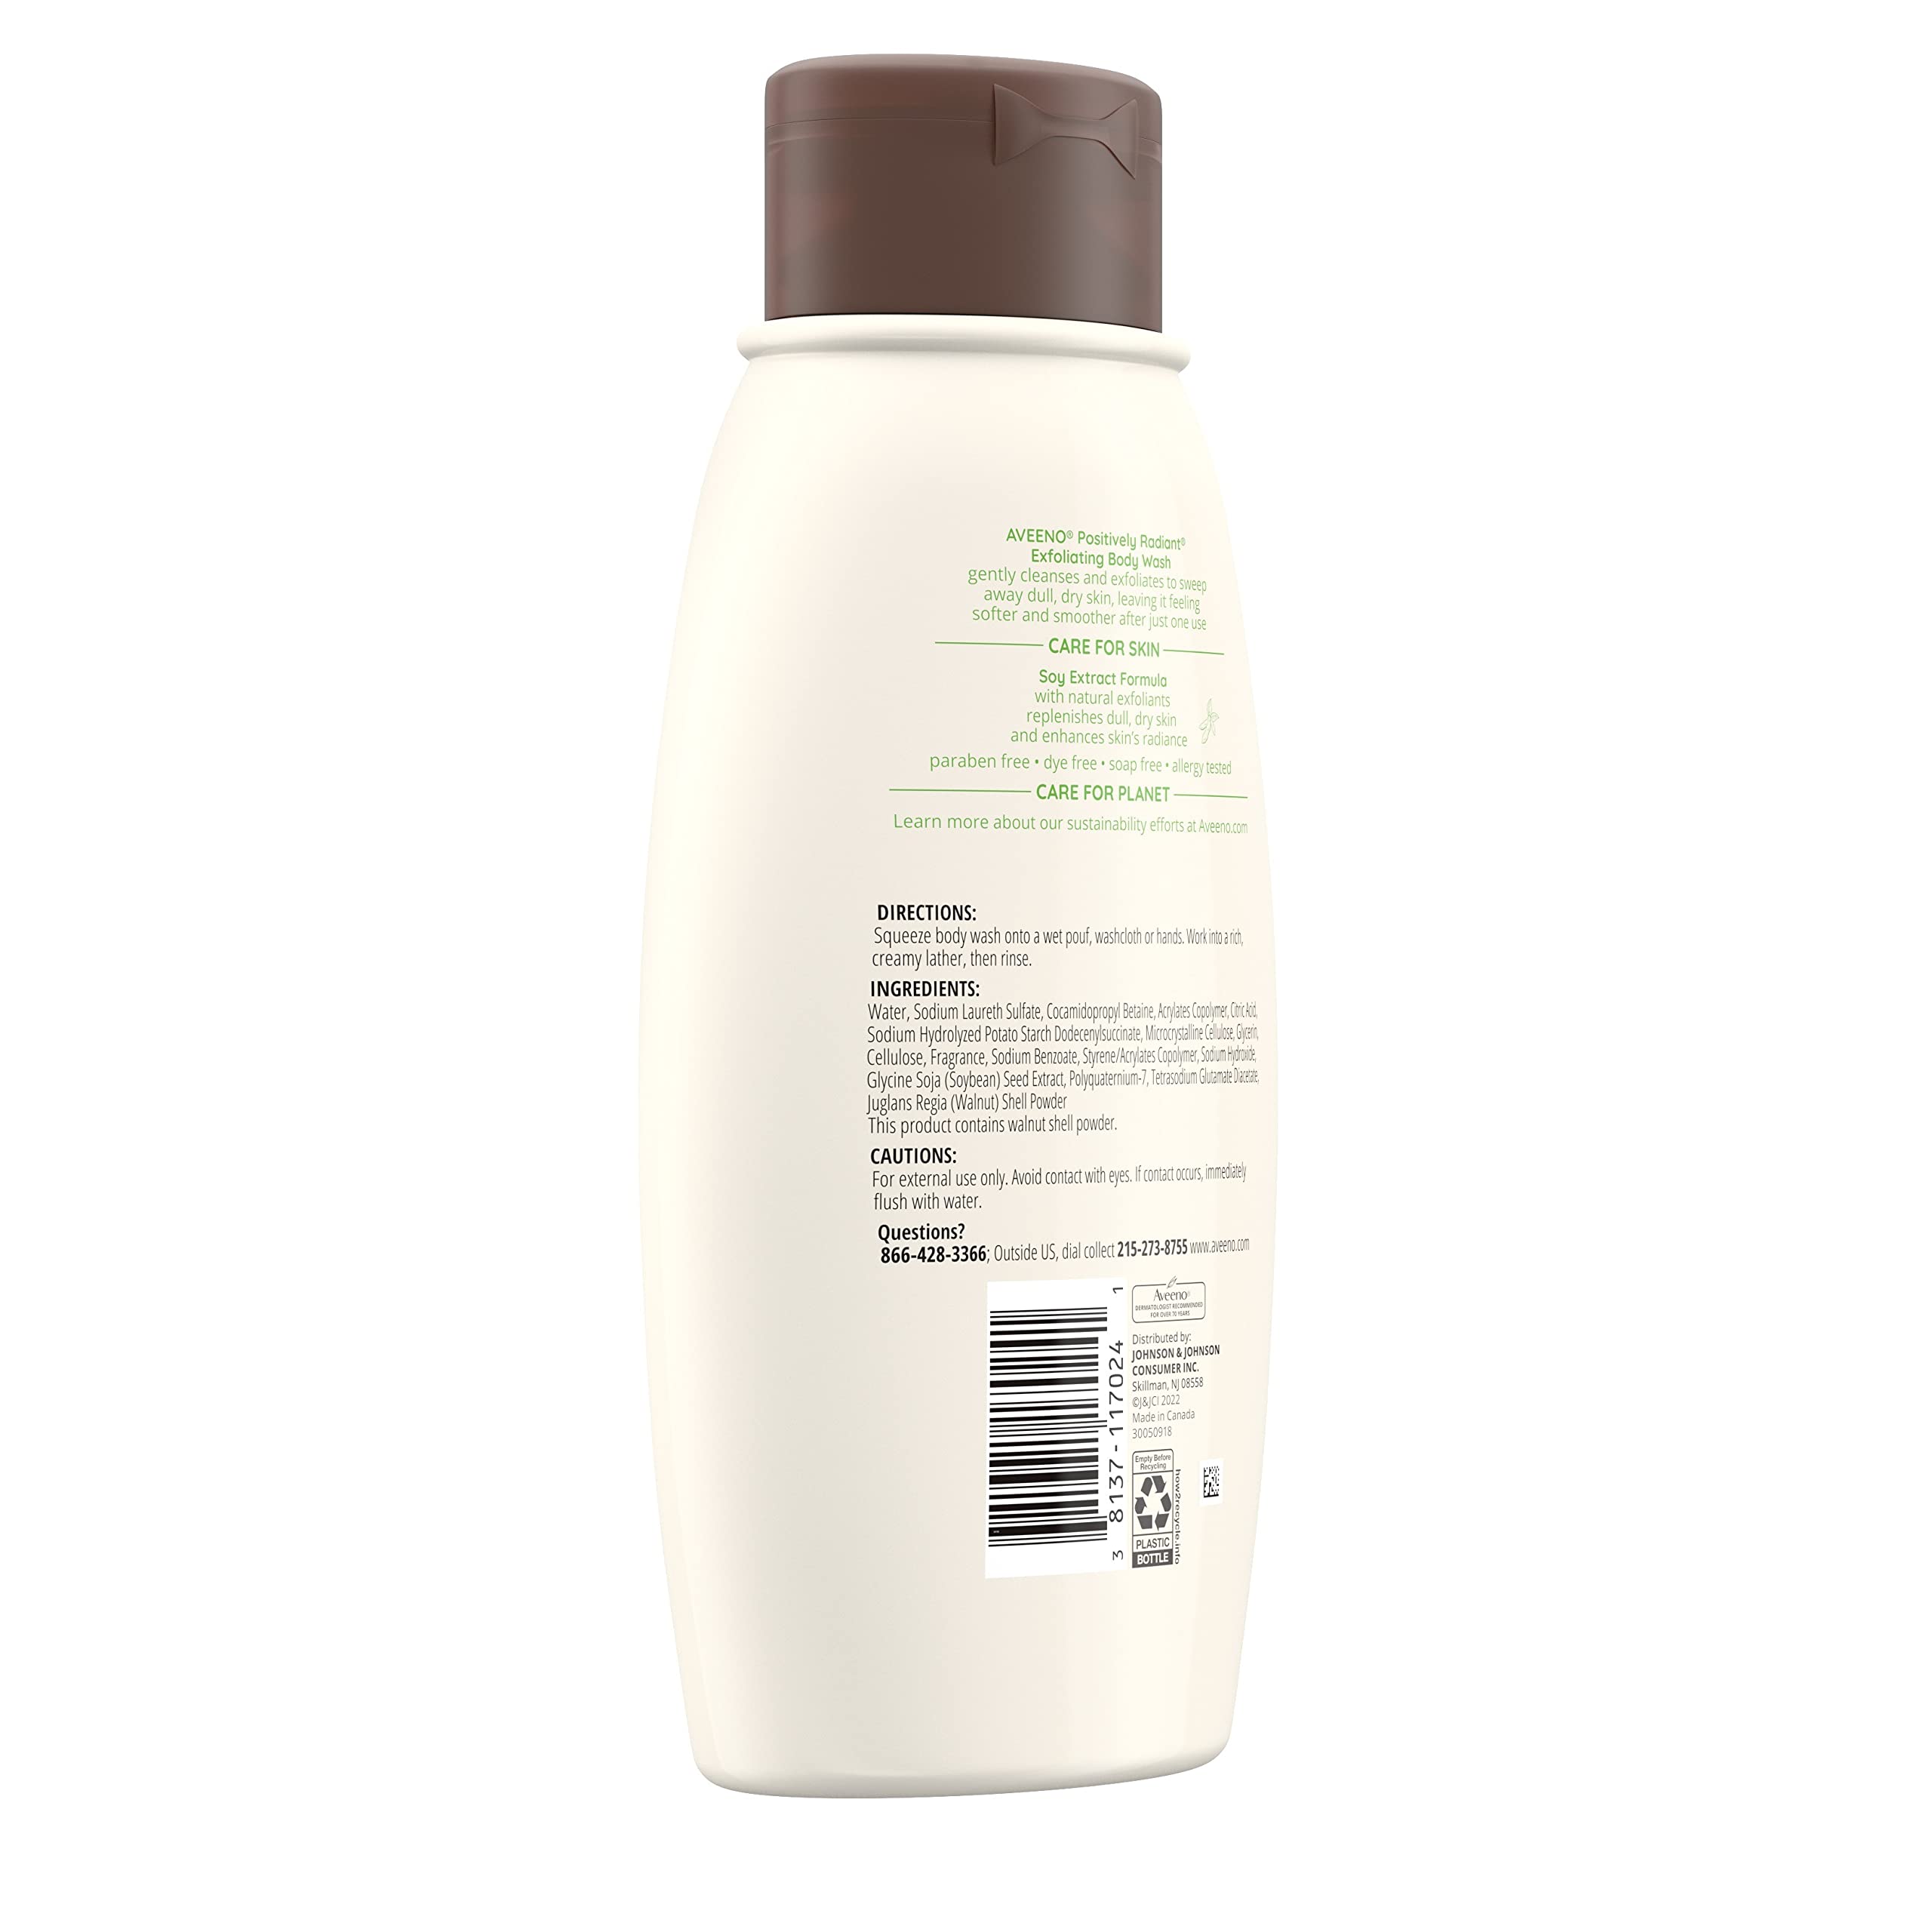 Aveeno Positively Radiant Exfoliating Body Wash with Soy Extract, Lightly Scented Body Cleanser Replenishes Dull, Dry Skin & Exfoliates to Reveal More Radiant, Beautiful Skin, 18 fl. oz